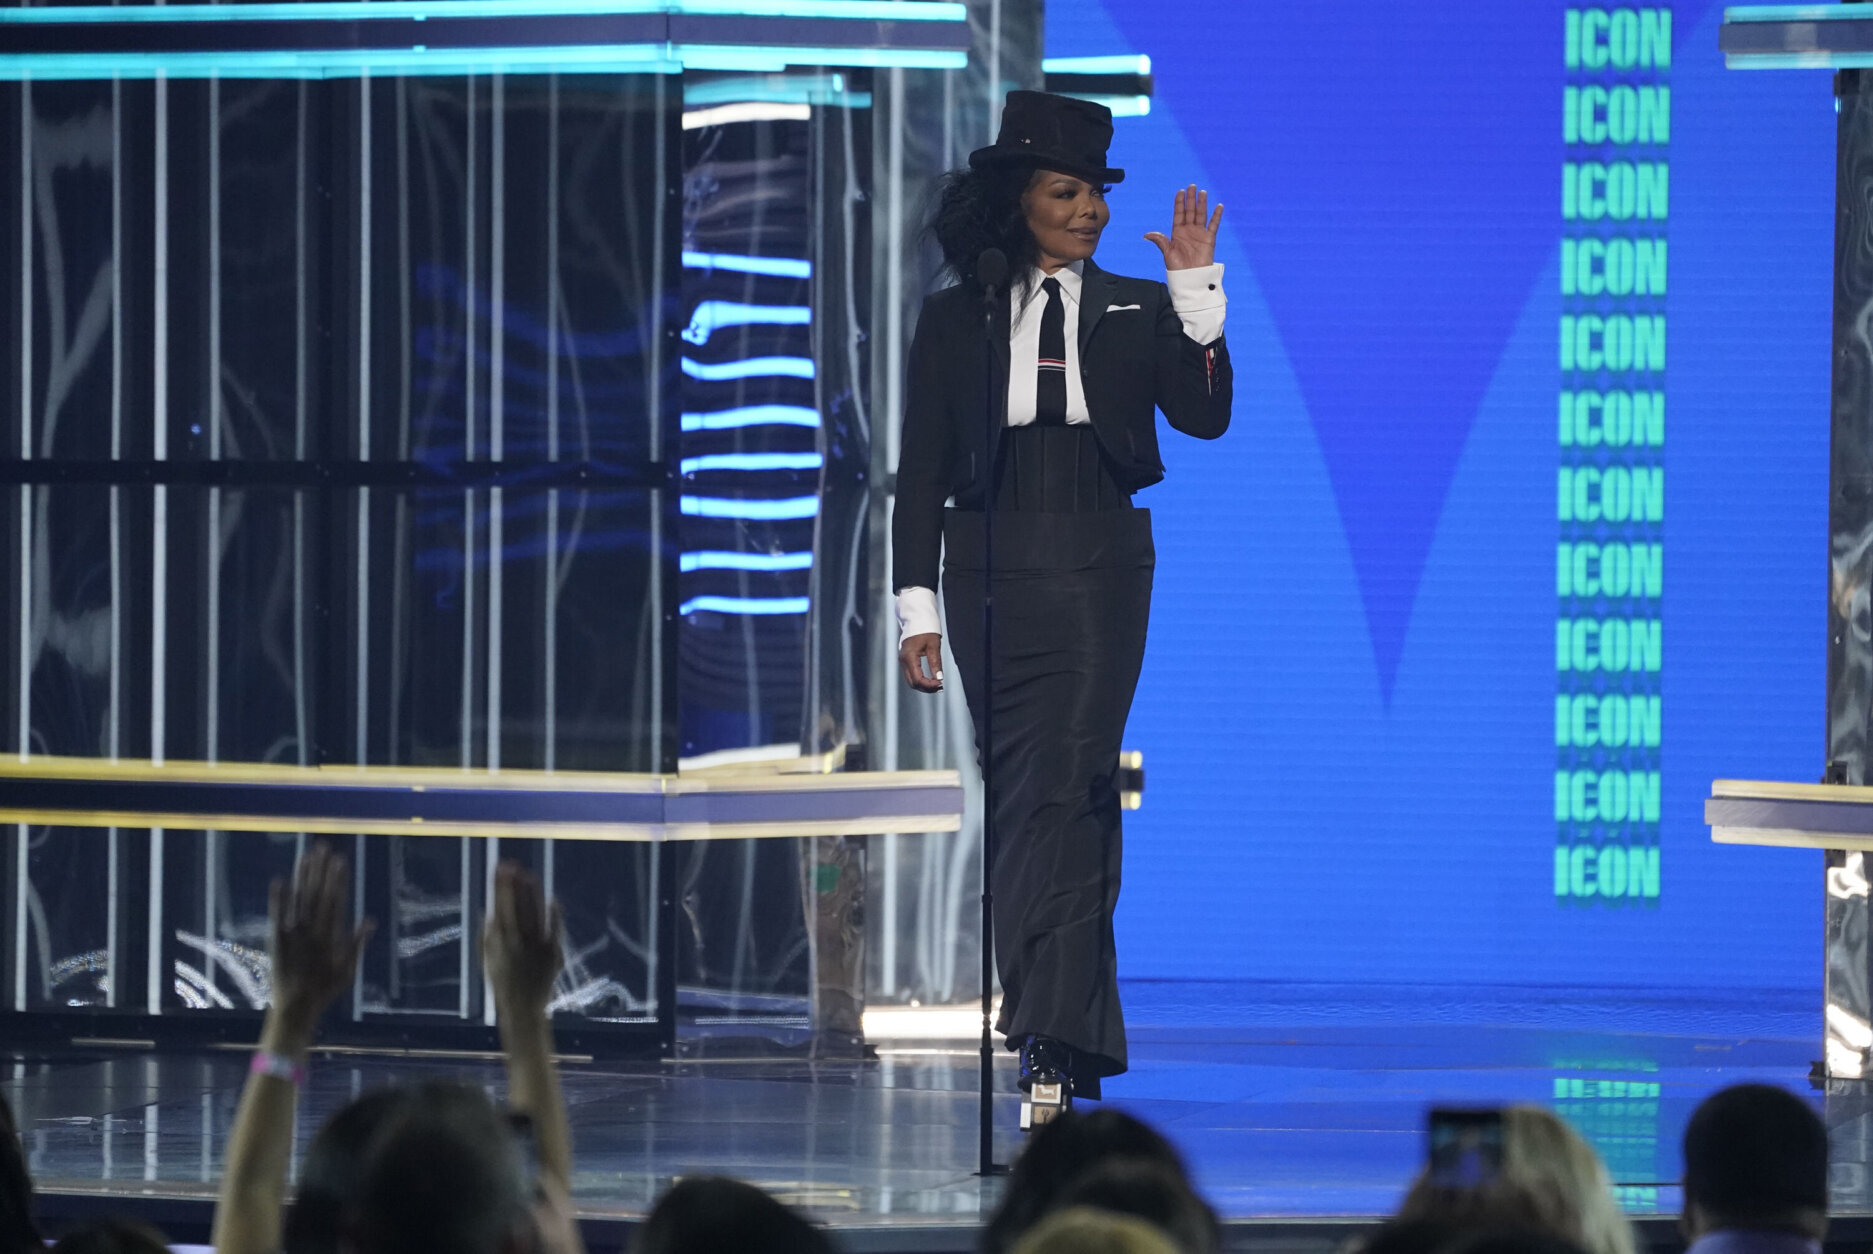 Janet Jackson appears on stage to introduce the Icon Award at the Billboard Music Awards on Sunday, May 15, 2022, at the MGM Grand Garden Arena in Las Vegas. (AP Photo/Chris Pizzello)